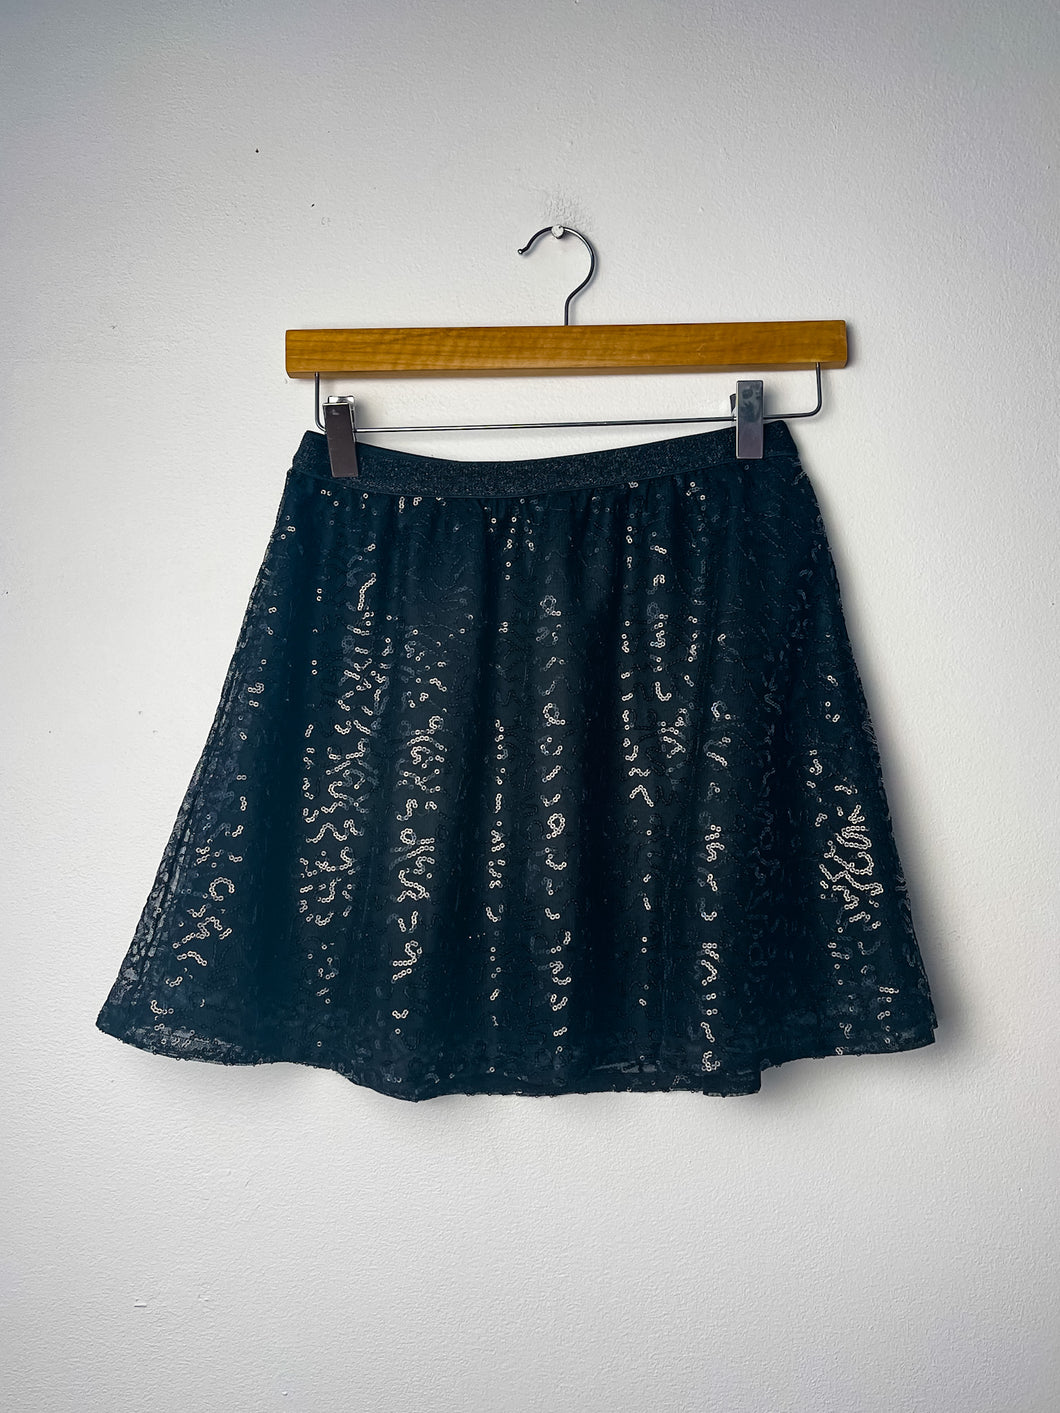 Sequins Children's Place Skirt Size 10/12 Years